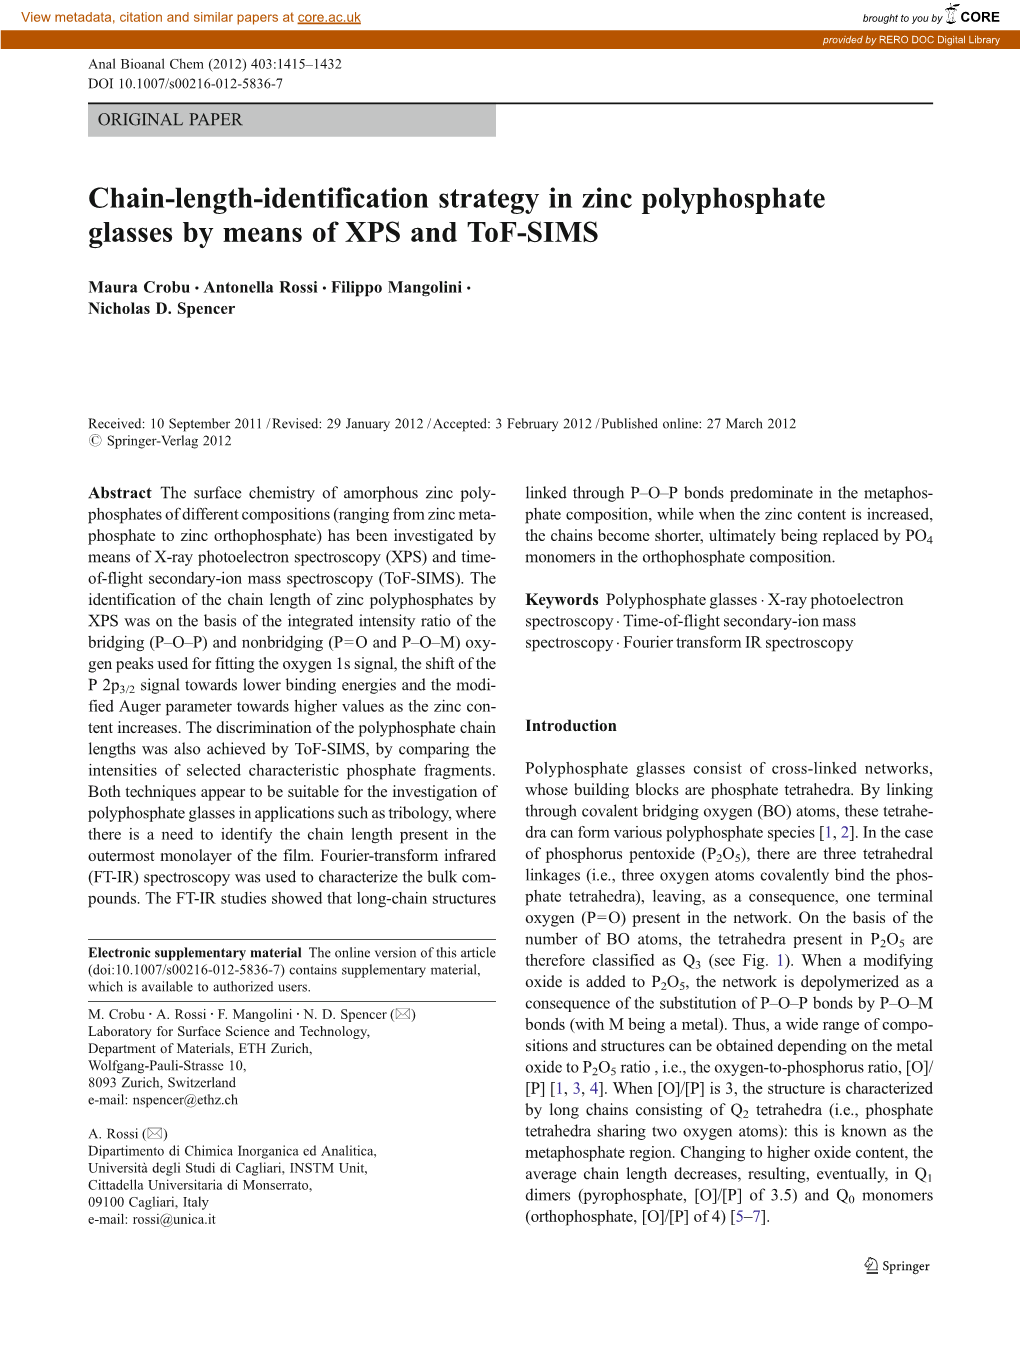 Chain-Length-Identification Strategy in Zinc Polyphosphate Glasses by Means of XPS and Tof-SIMS